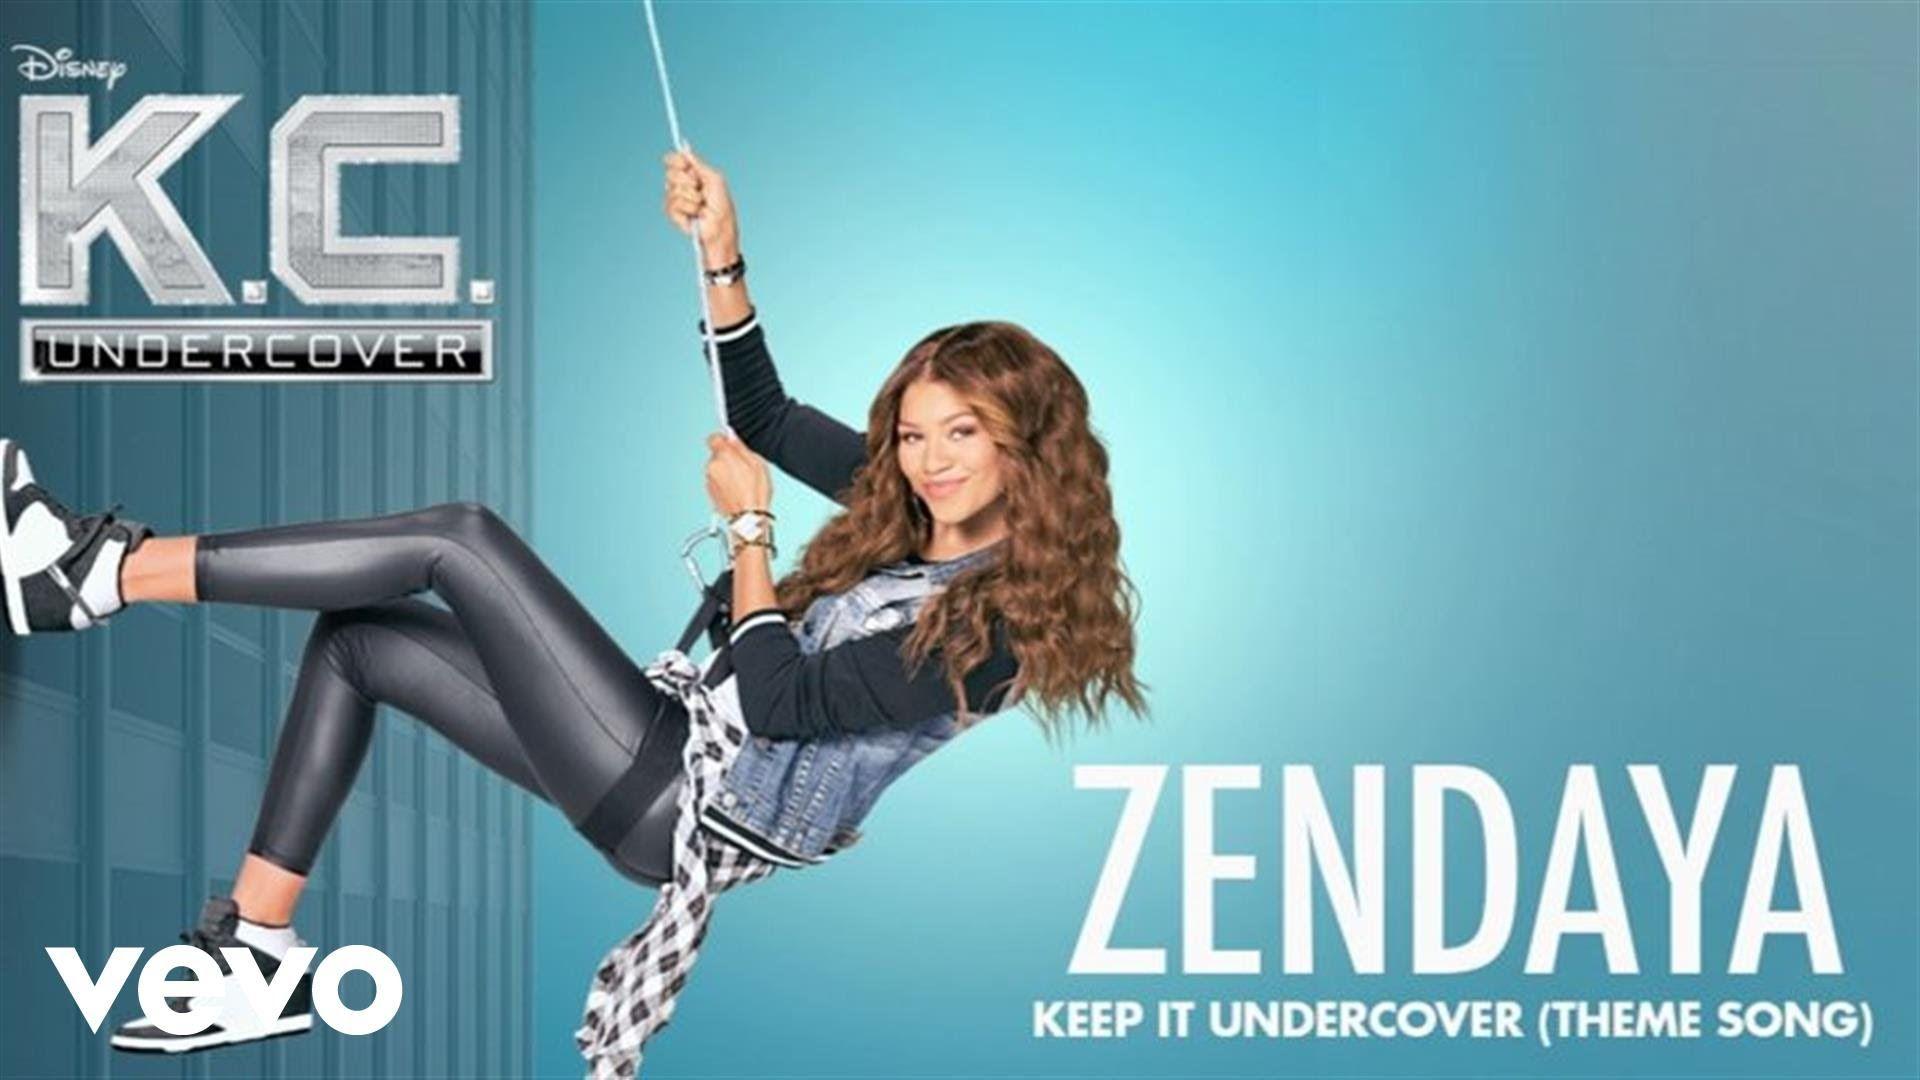 Zendaya It Undercover Theme Song From K.C. Undercover